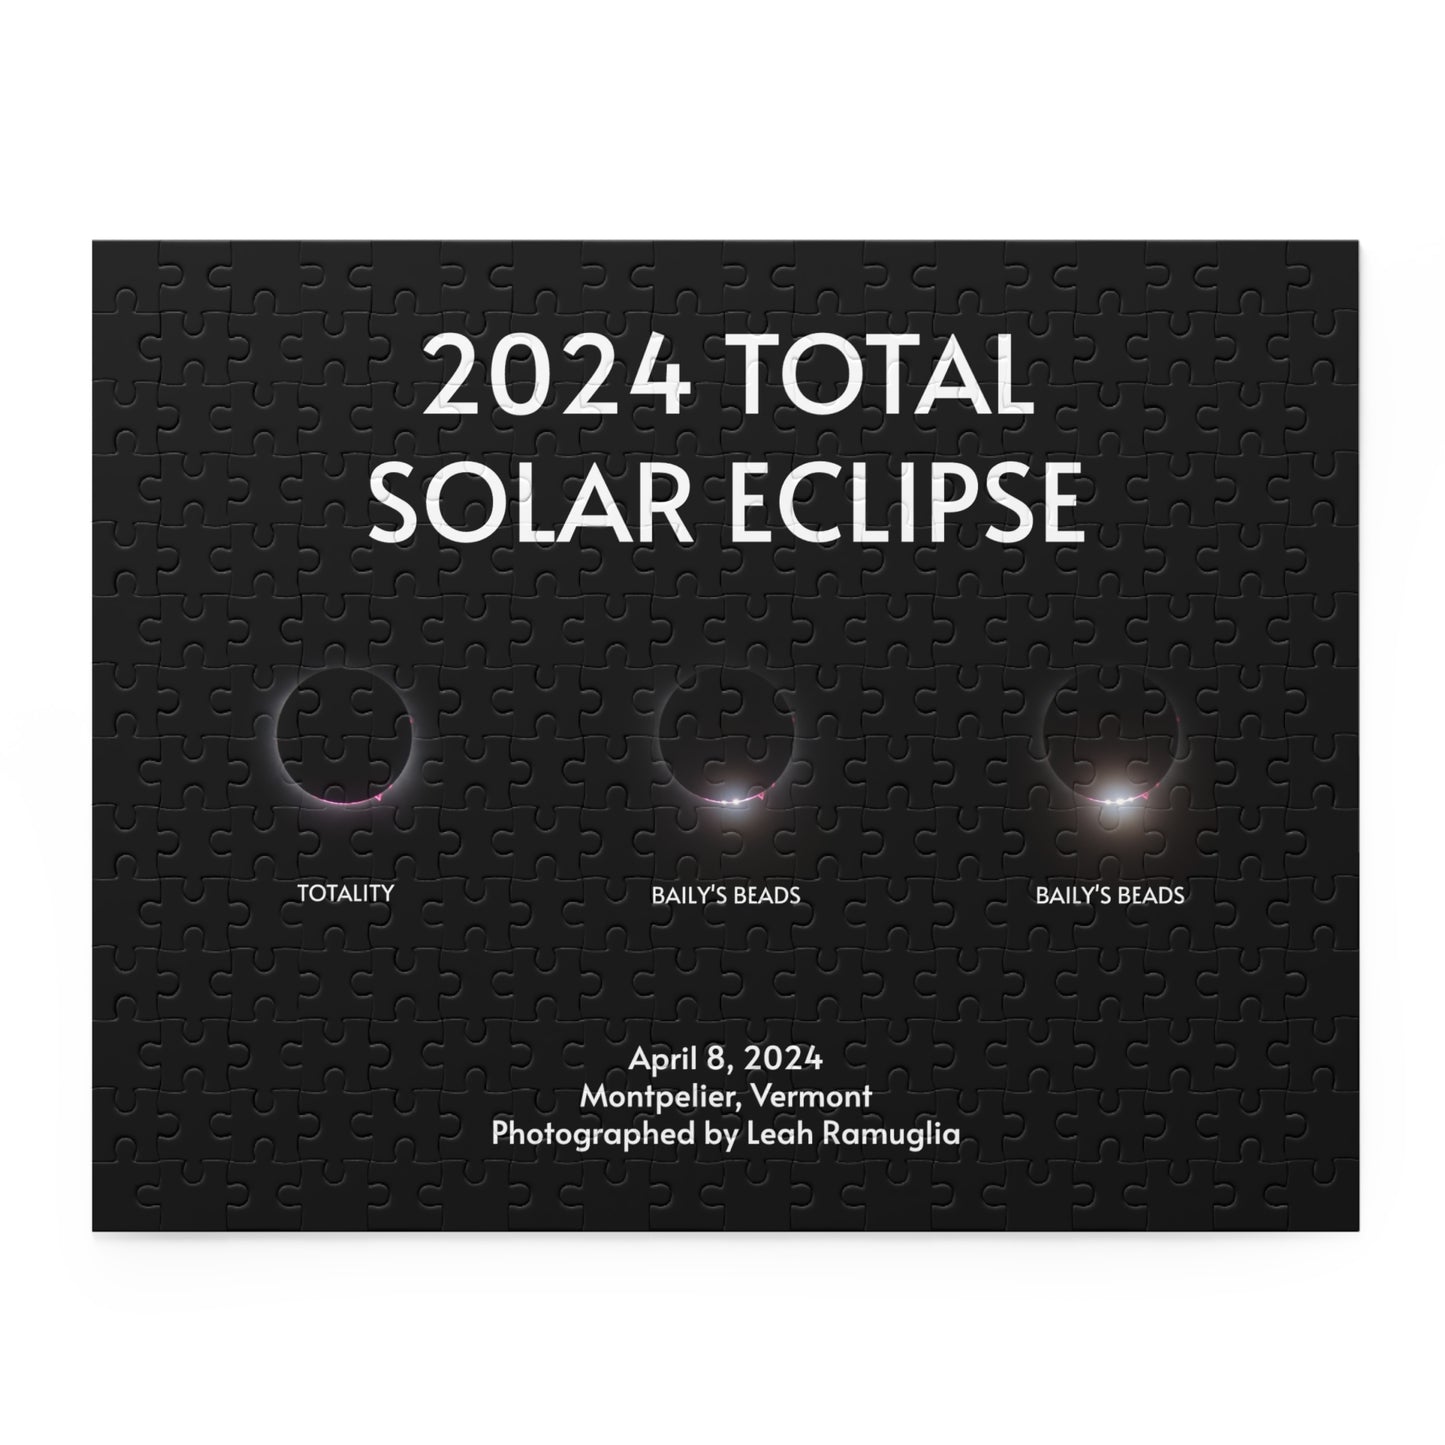 2024 Total Solar Eclipse Totality & Baily’s Beads Puzzle